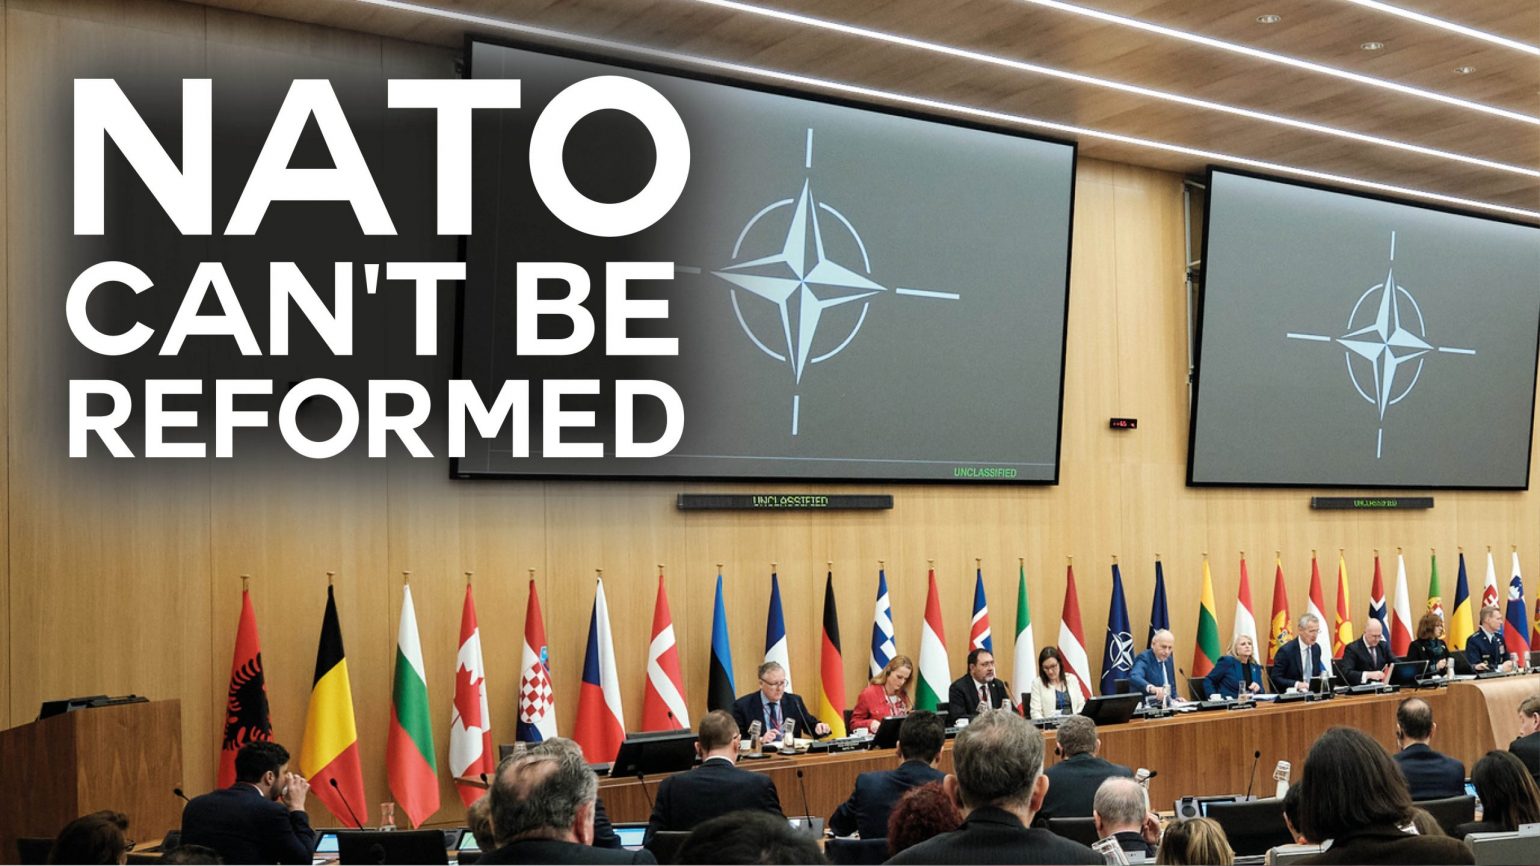 A photo of a NATO meeting with text overlaid reading "NATO can't be reformed"